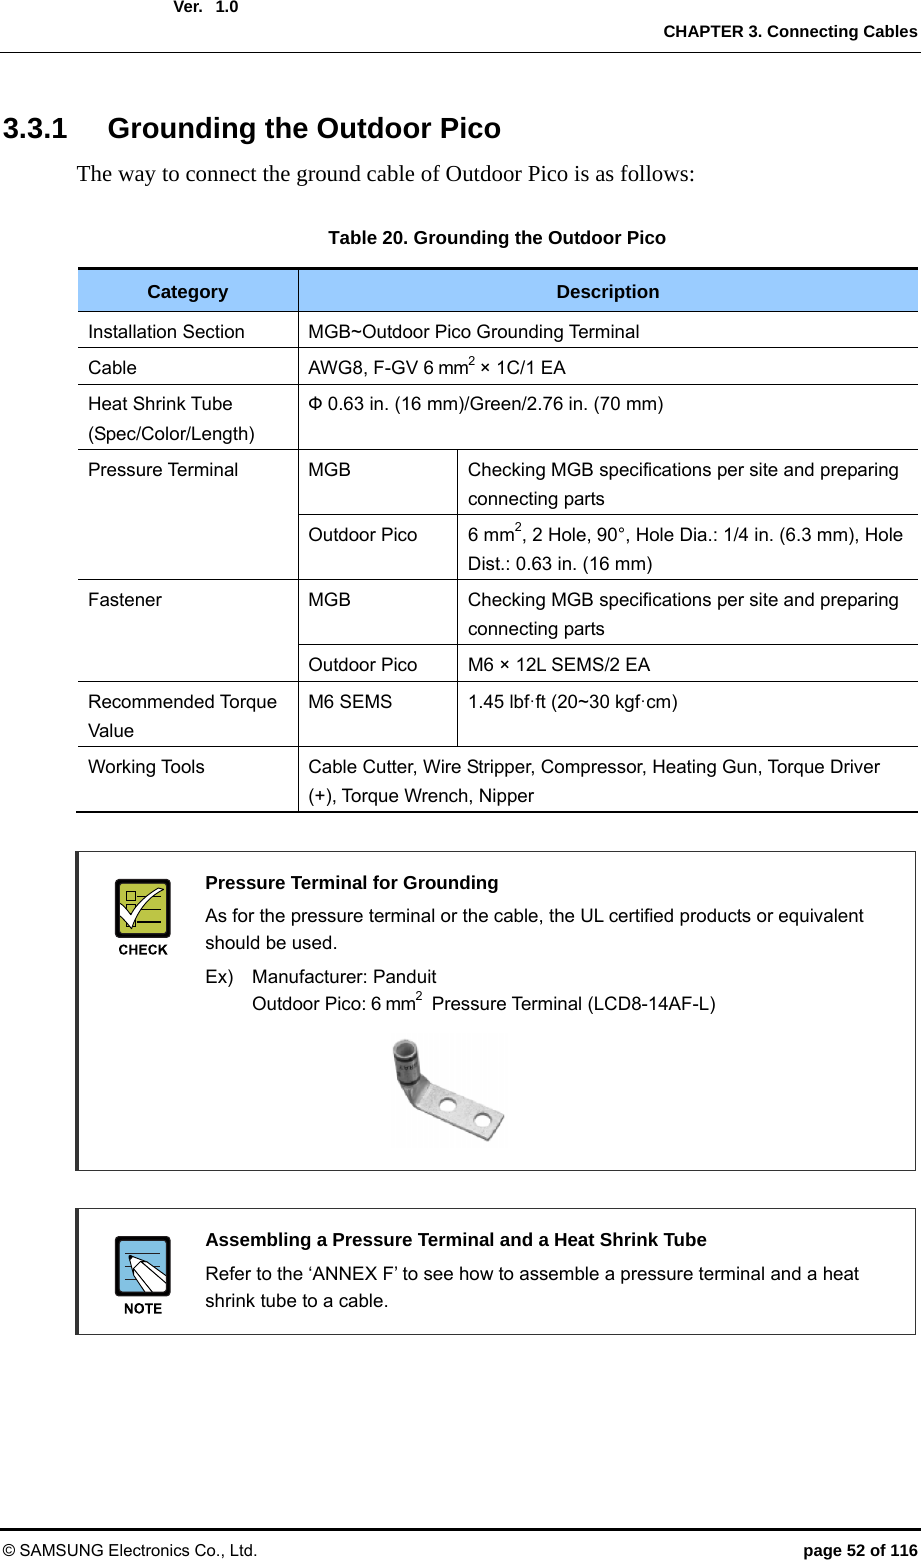  Ver.   CHAPTER 3. Connecting Cables © SAMSUNG Electronics Co., Ltd.  page 52 of 116 1.03.3.1  Grounding the Outdoor Pico The way to connect the ground cable of Outdoor Pico is as follows:  Table 20. Grounding the Outdoor Pico Category  Description Installation Section  MGB~Outdoor Pico Grounding Terminal Cable  AWG8, F-GV 6 mm2 × 1C/1 EA Heat Shrink Tube (Spec/Color/Length) Ф 0.63 in. (16 mm)/Green/2.76 in. (70 mm) Pressure Terminal  MGB  Checking MGB specifications per site and preparing connecting parts Outdoor Pico  6 mm2, 2 Hole, 90°, Hole Dia.: 1/4 in. (6.3 mm), Hole Dist.: 0.63 in. (16 mm) Fastener  MGB  Checking MGB specifications per site and preparing connecting parts Outdoor Pico  M6 × 12L SEMS/2 EA Recommended Torque Value M6 SEMS  1.45 lbf·ft (20~30 kgf·cm) Working Tools  Cable Cutter, Wire Stripper, Compressor, Heating Gun, Torque Driver (+), Torque Wrench, Nipper   Pressure Terminal for Grounding   As for the pressure terminal or the cable, the UL certified products or equivalent should be used.   Ex)  Manufacturer: Panduit  Outdoor Pico: 6 mm2  Pressure Terminal (LCD8-14AF-L)       Assembling a Pressure Terminal and a Heat Shrink Tube   Refer to the ‘ANNEX F’ to see how to assemble a pressure terminal and a heat shrink tube to a cable.  